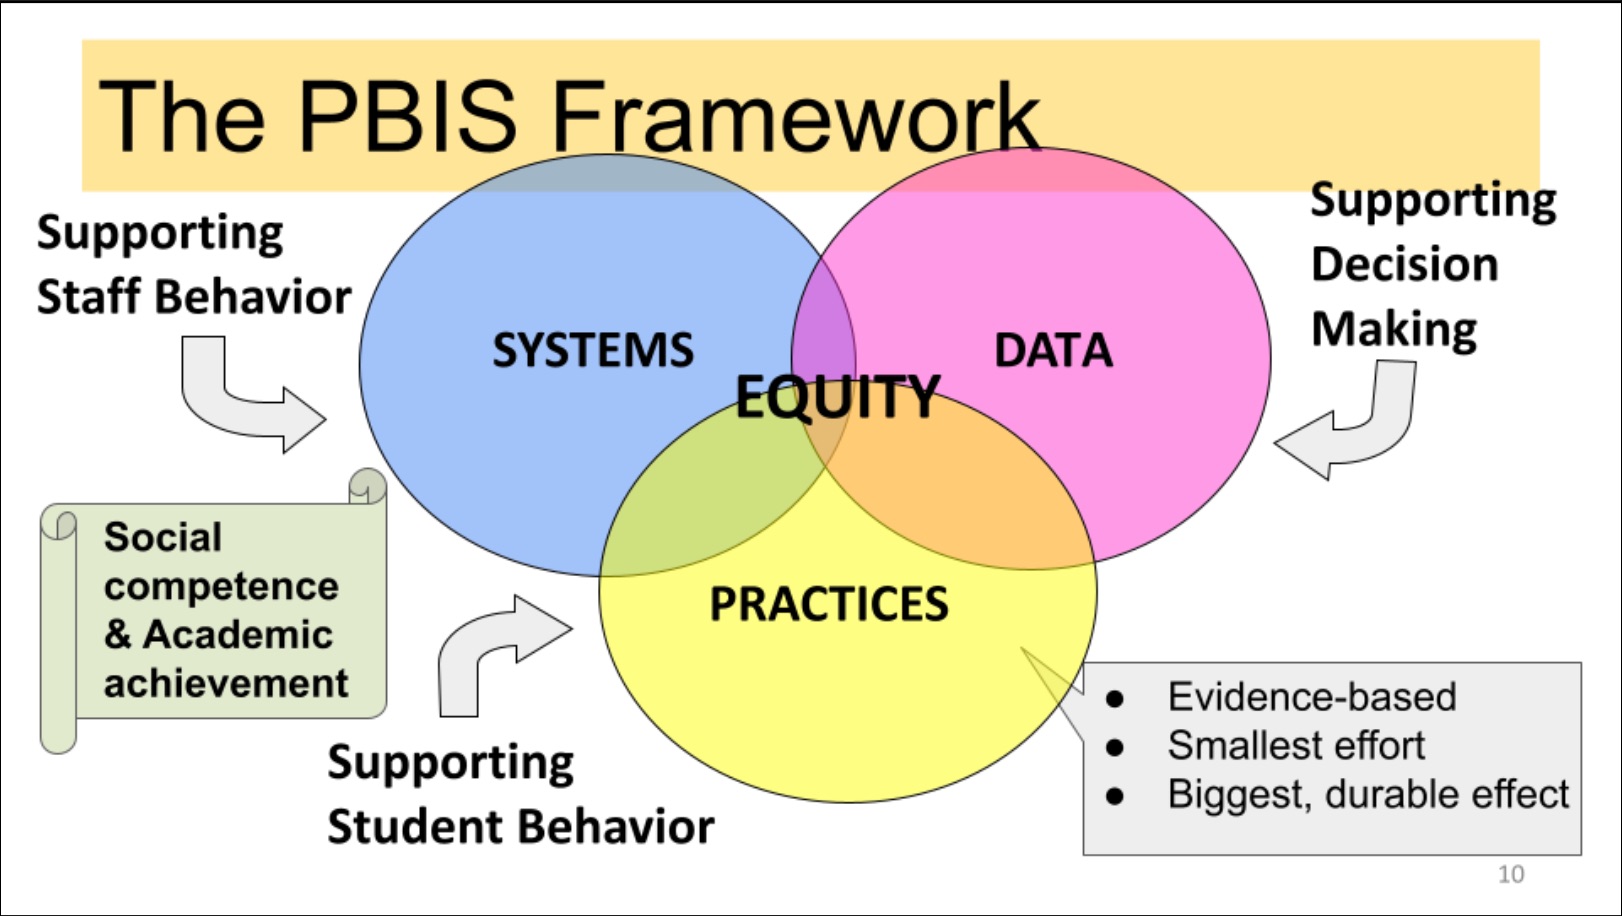 A Venn diagram showing how Equity exists where Systems, Data, and Practices overlap.